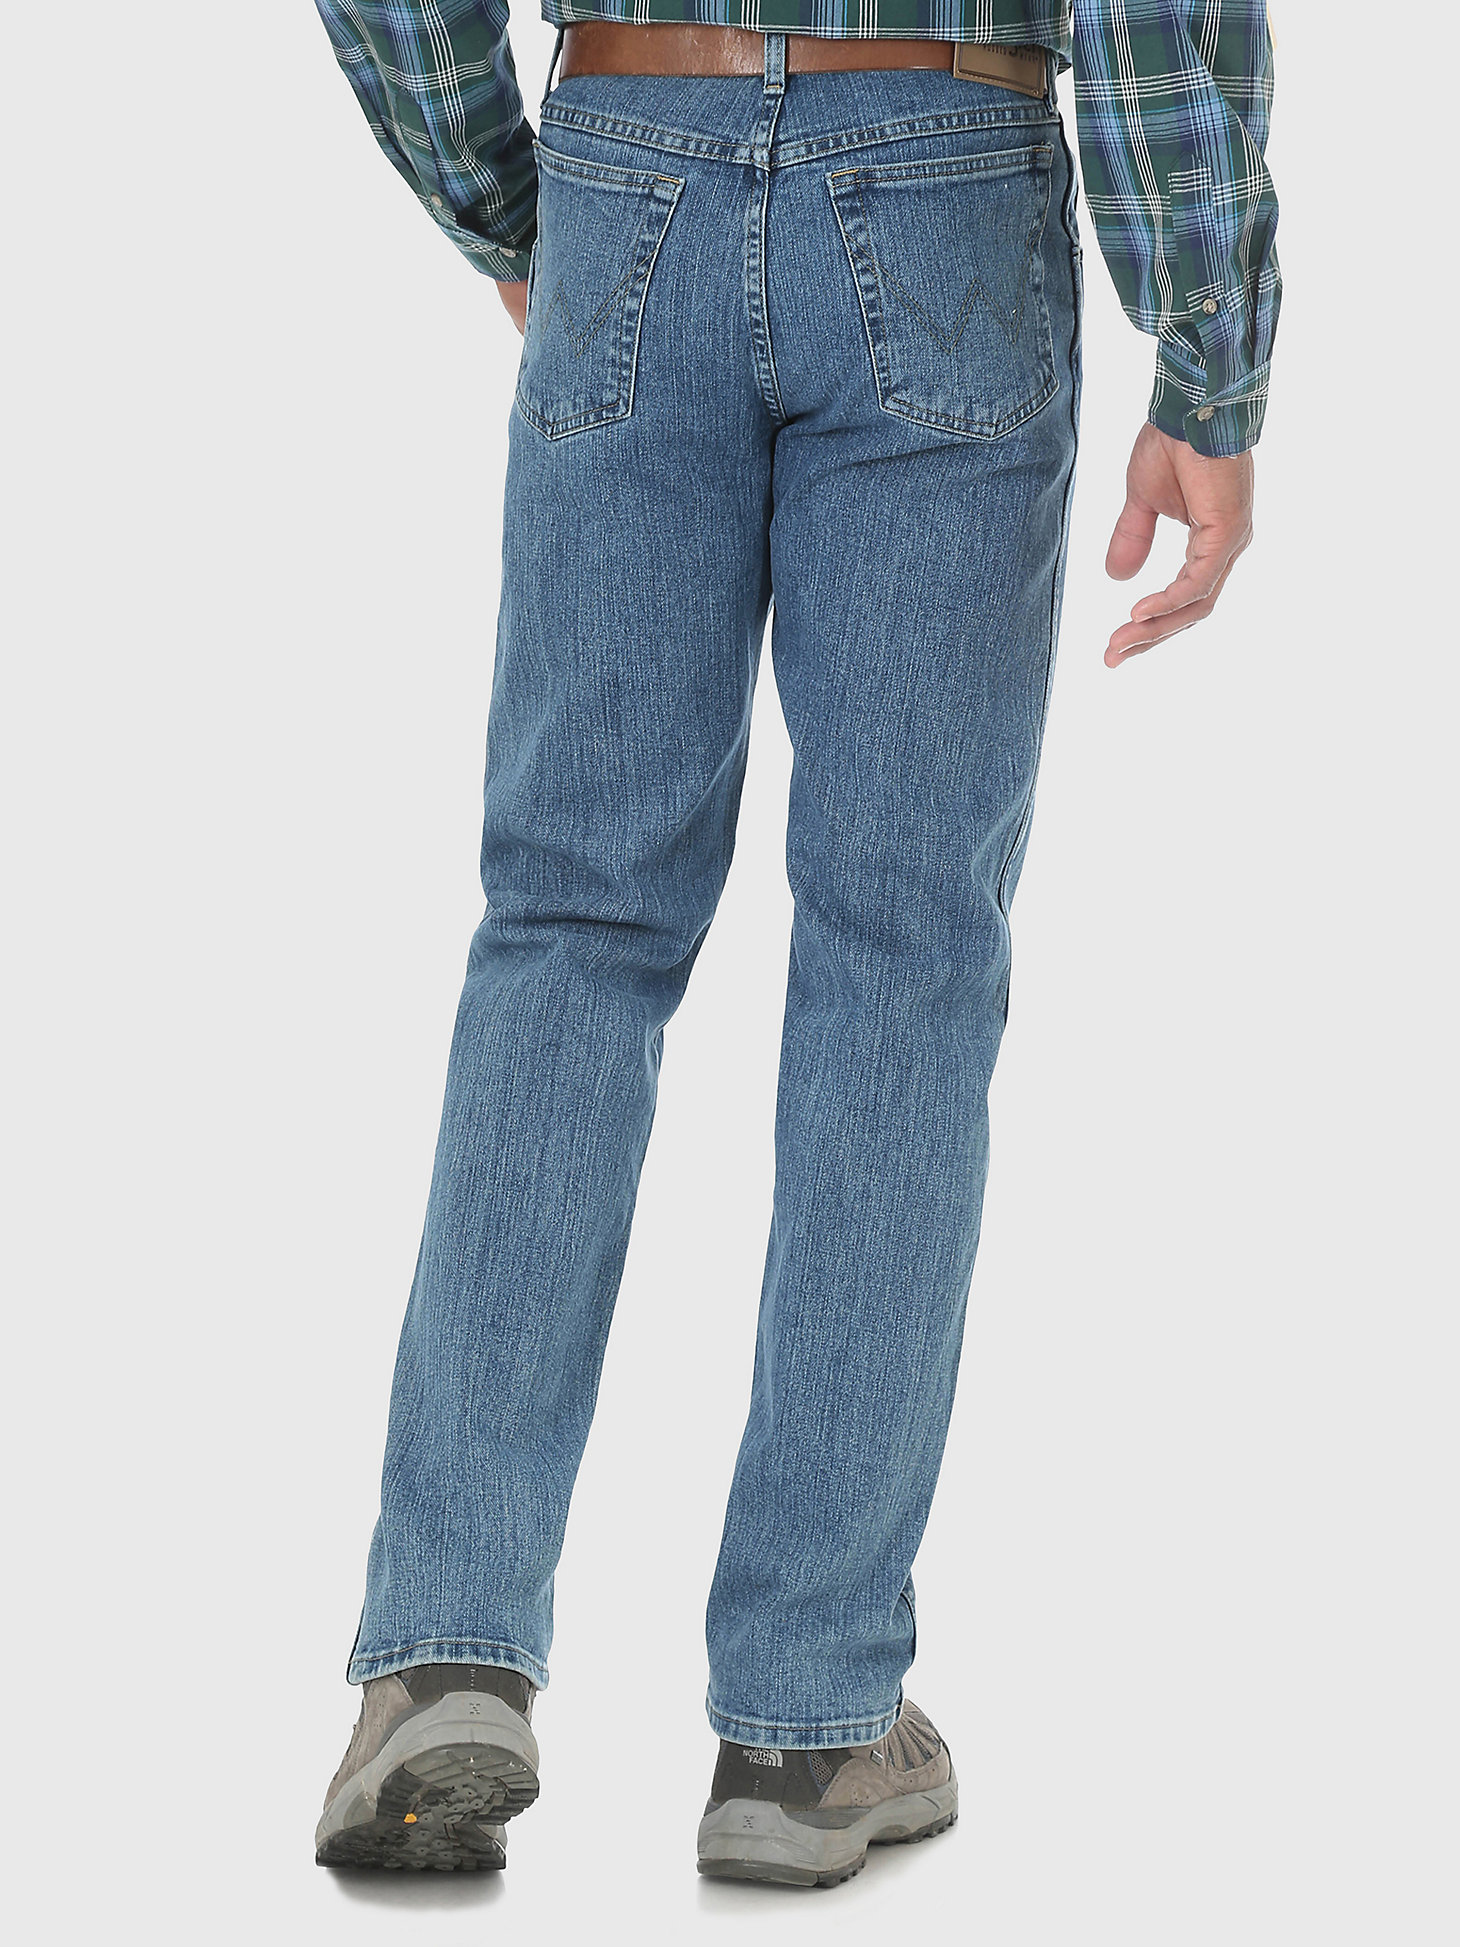 Wrangler Rugged Wear® Performance Series Relaxed Fit Jean in Light Stone alternative view 1